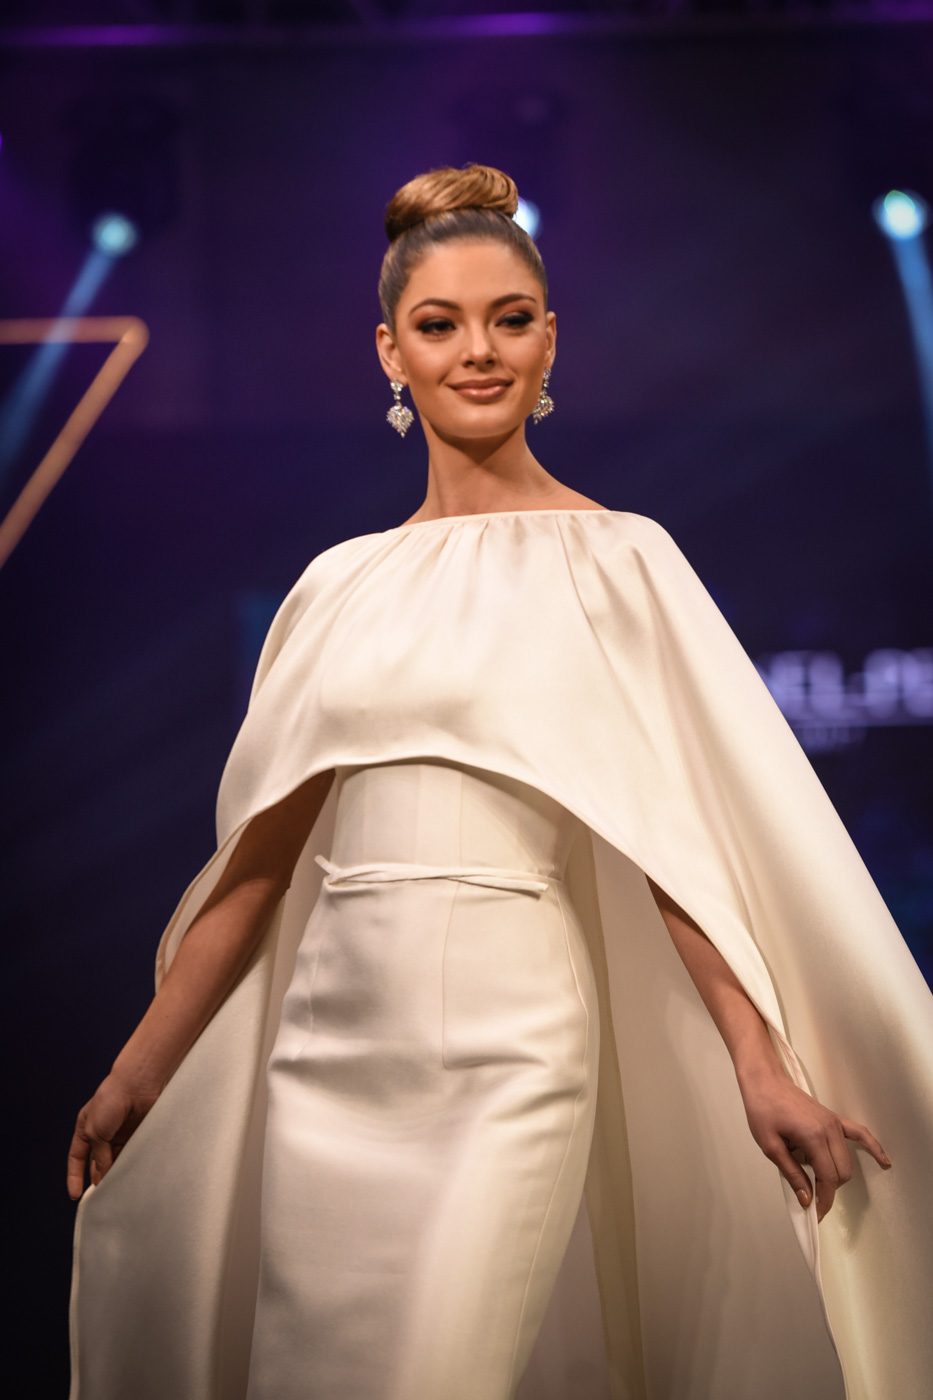 Miss Universe 2017 Demi-Leigh Nel-Peters in a Rajo Laurel creation  